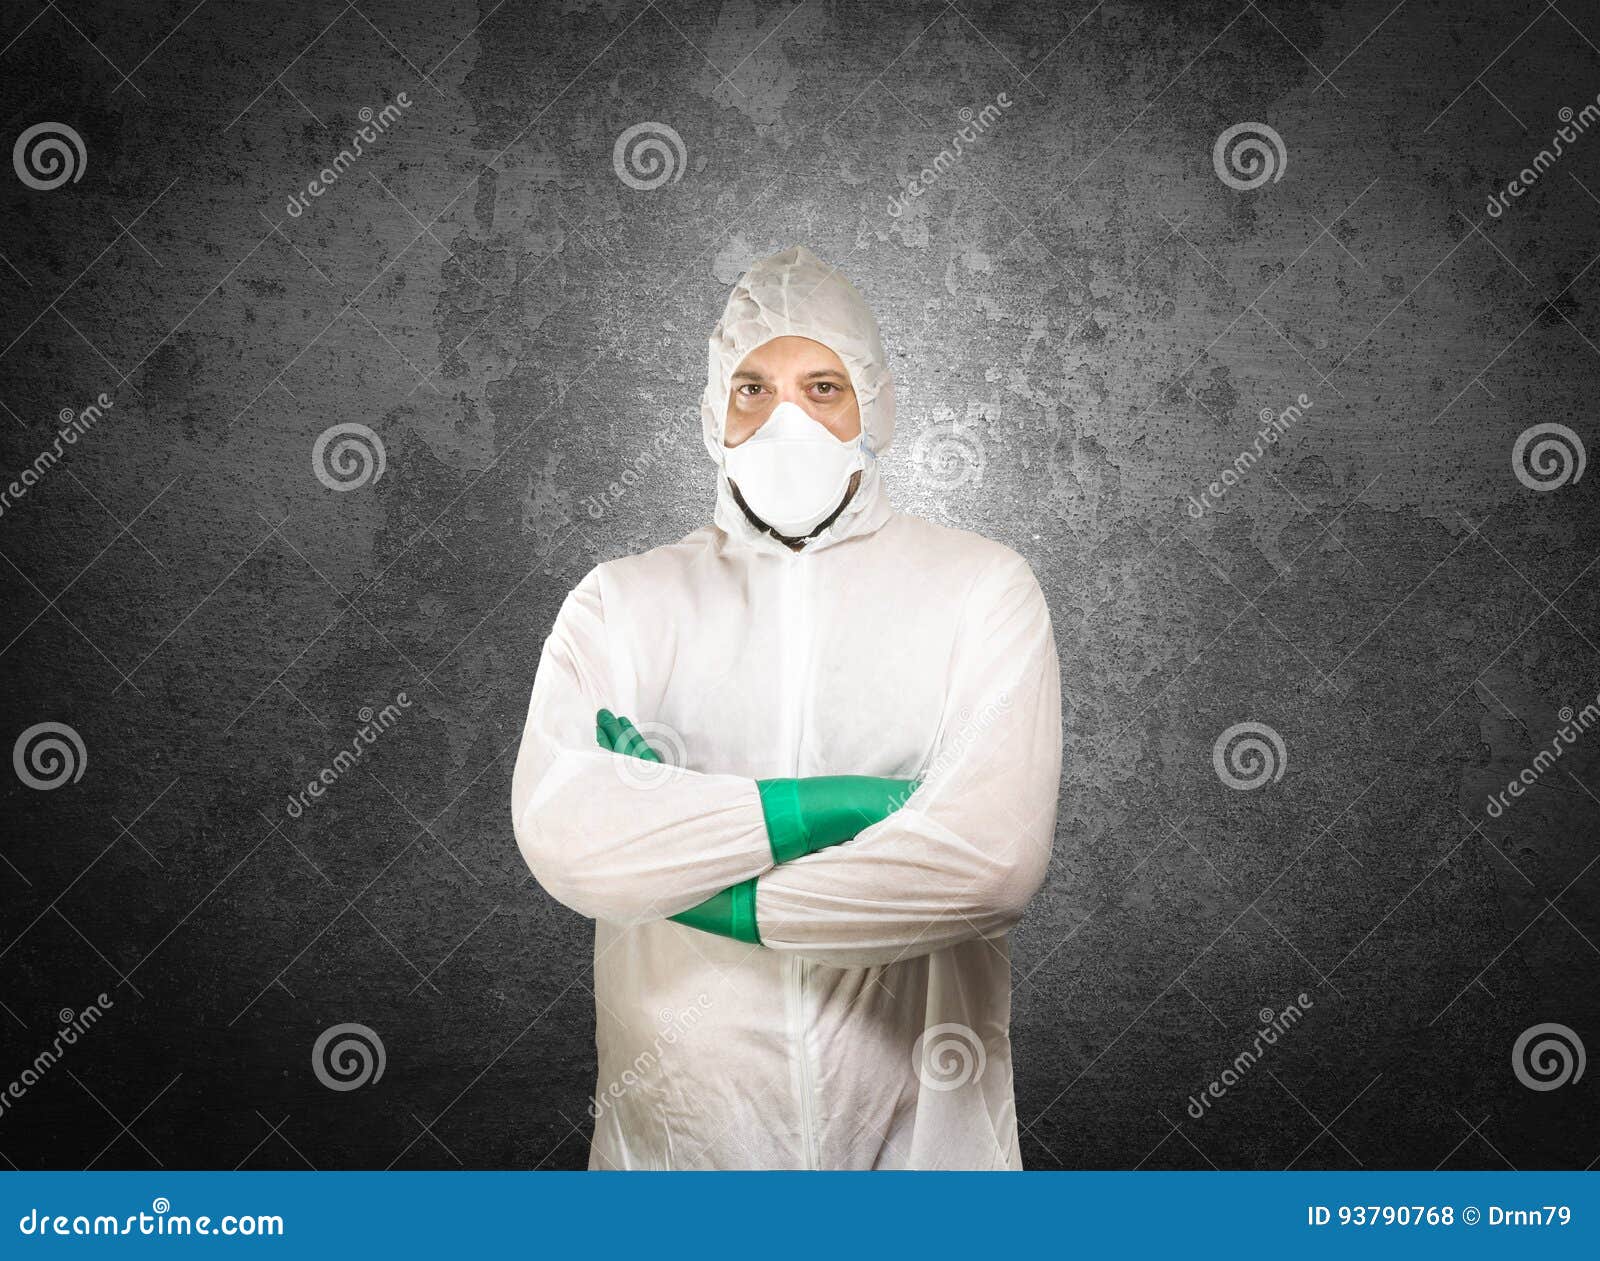 Forensics in Protective Clothing Stock Photo - Image of enlightenment ...